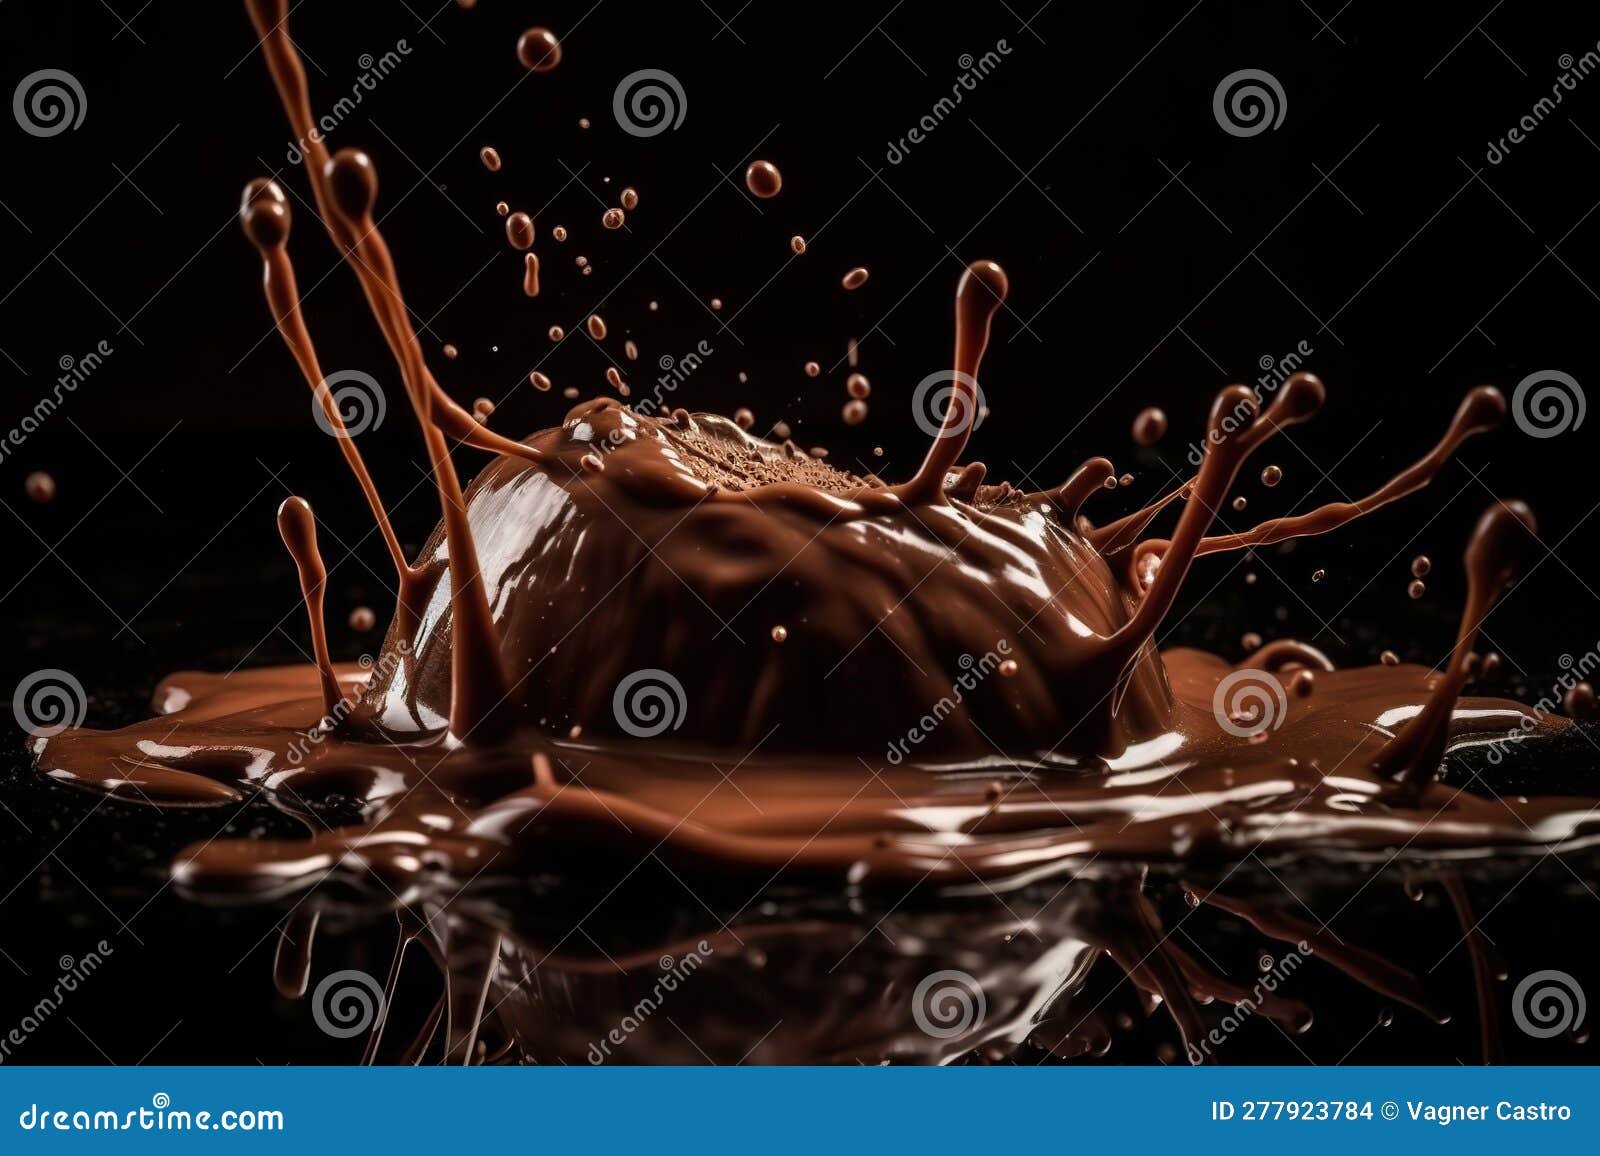 https://thumbs.dreamstime.com/z/illustration-melted-hot-chocolate-background-melted-dark-chocolate-flow-liquid-chocolate-crown-splash-ripples-realistic-d-277923784.jpg